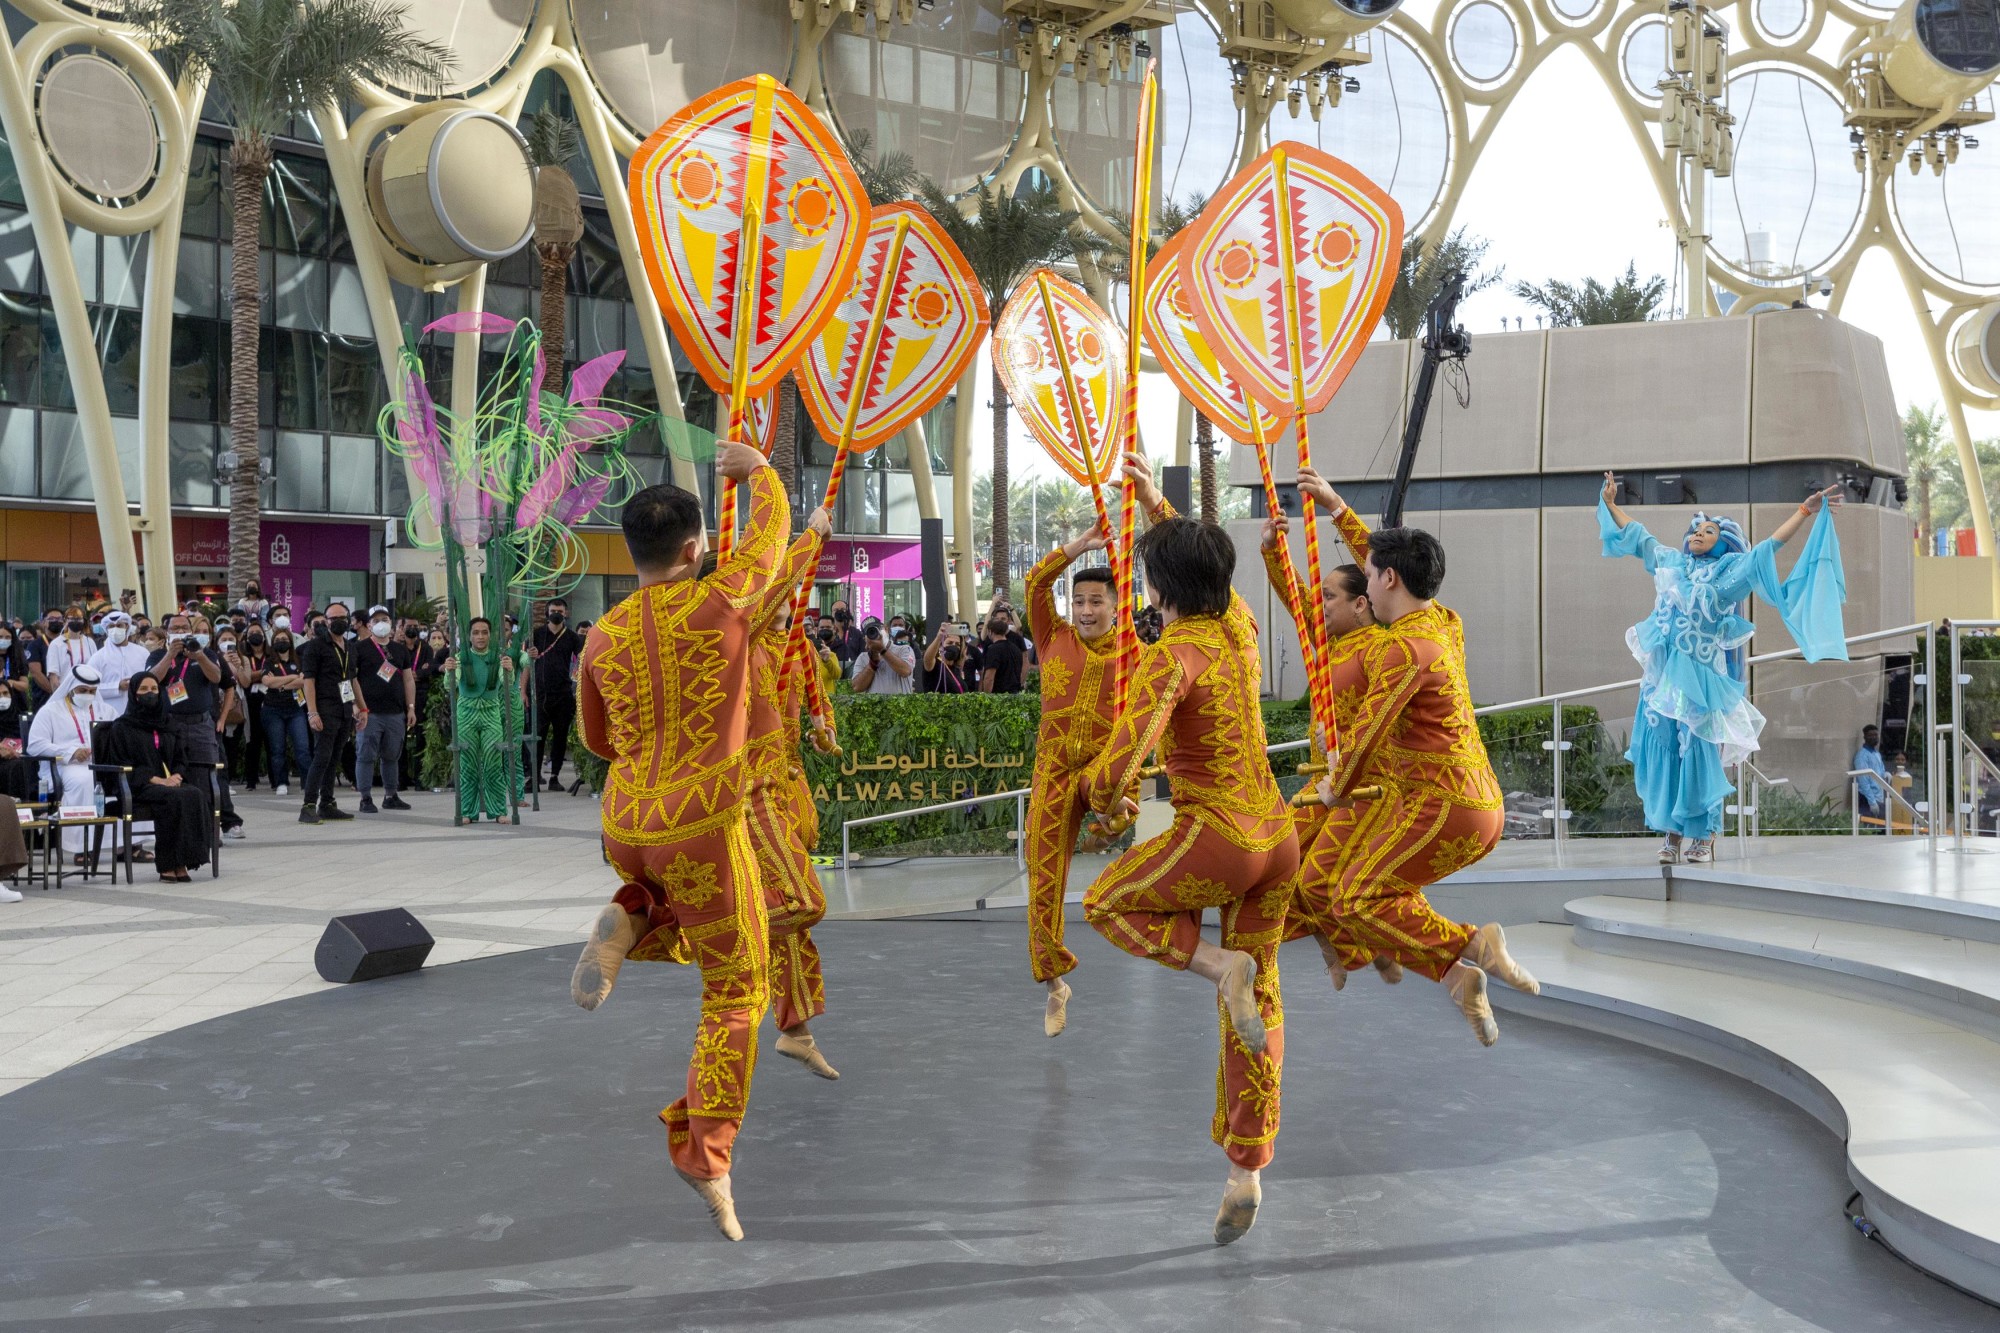 Cultural performance during the Philippines National Day Ceremony at Al Wasl m46883